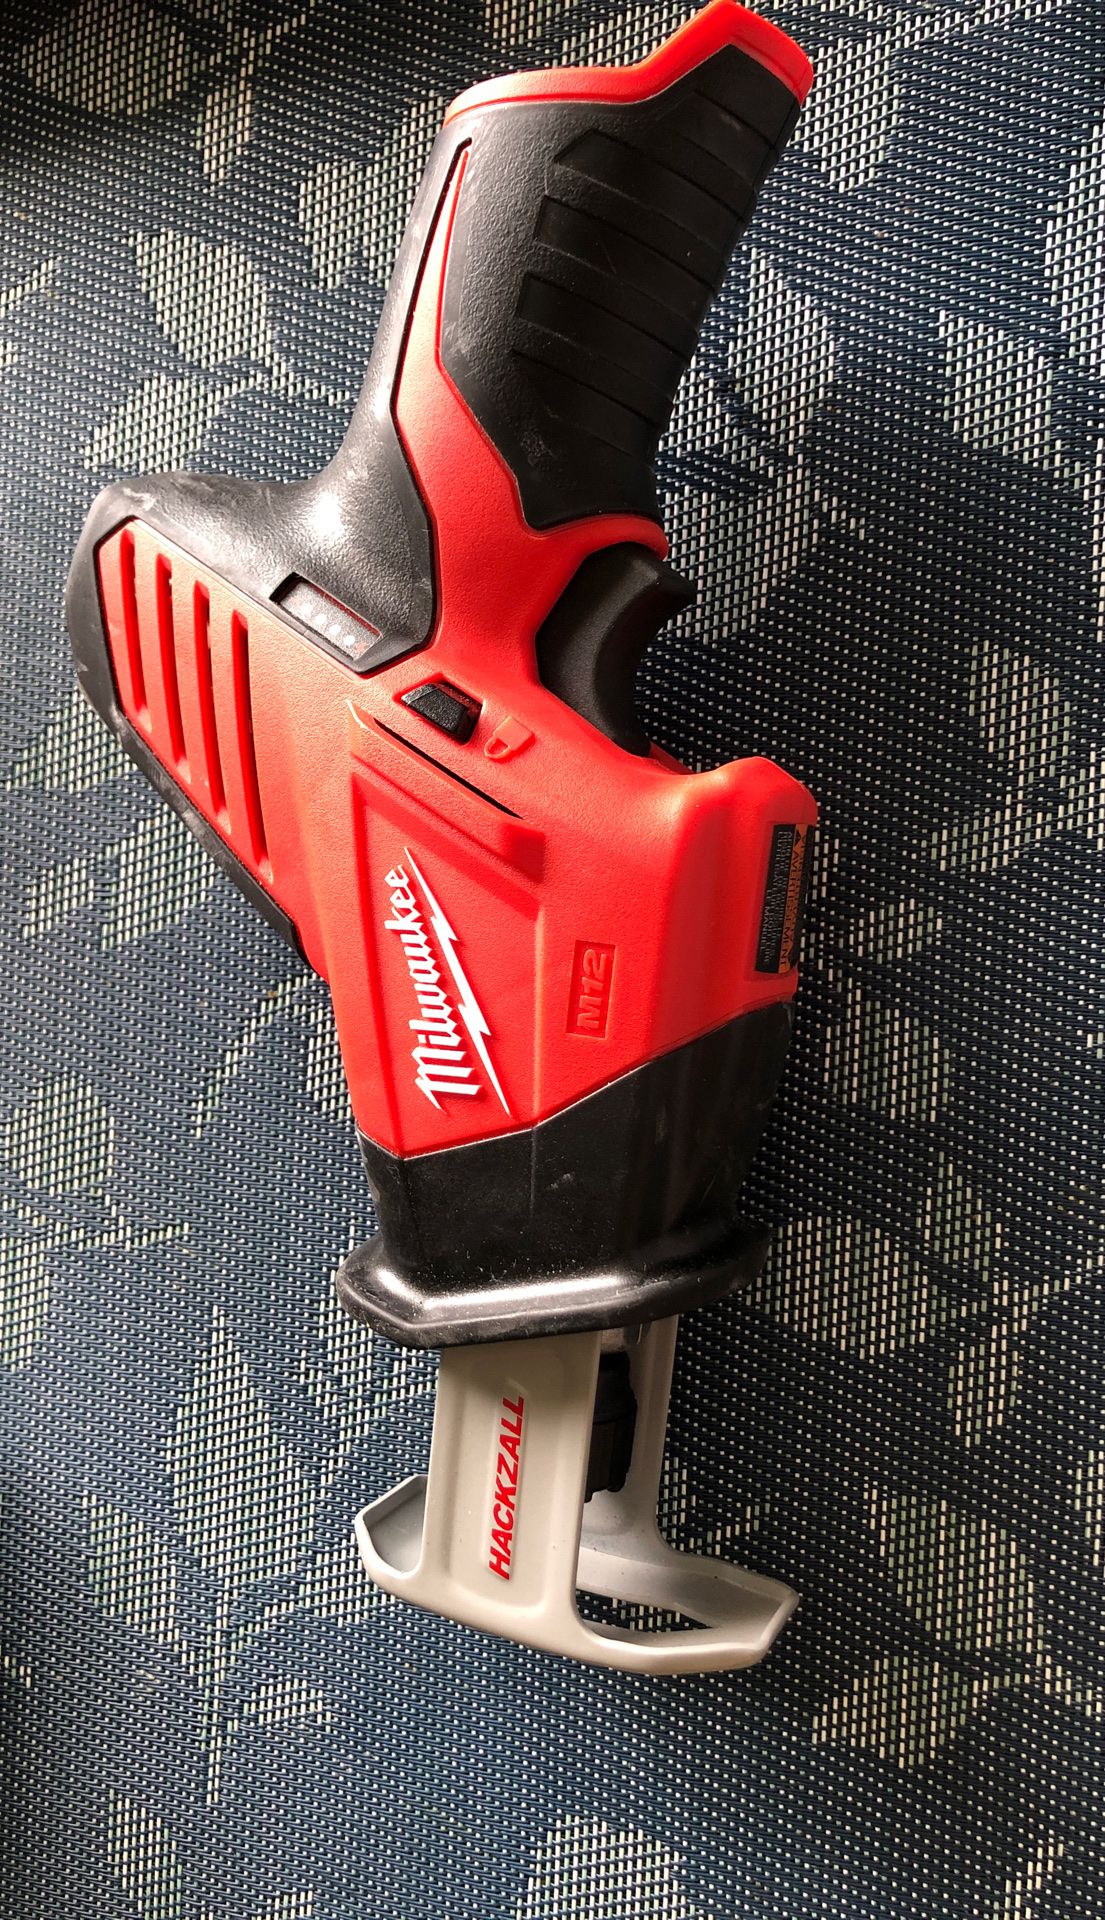 Milwaukee M12 Hackzall reciprocating saw (tool only)